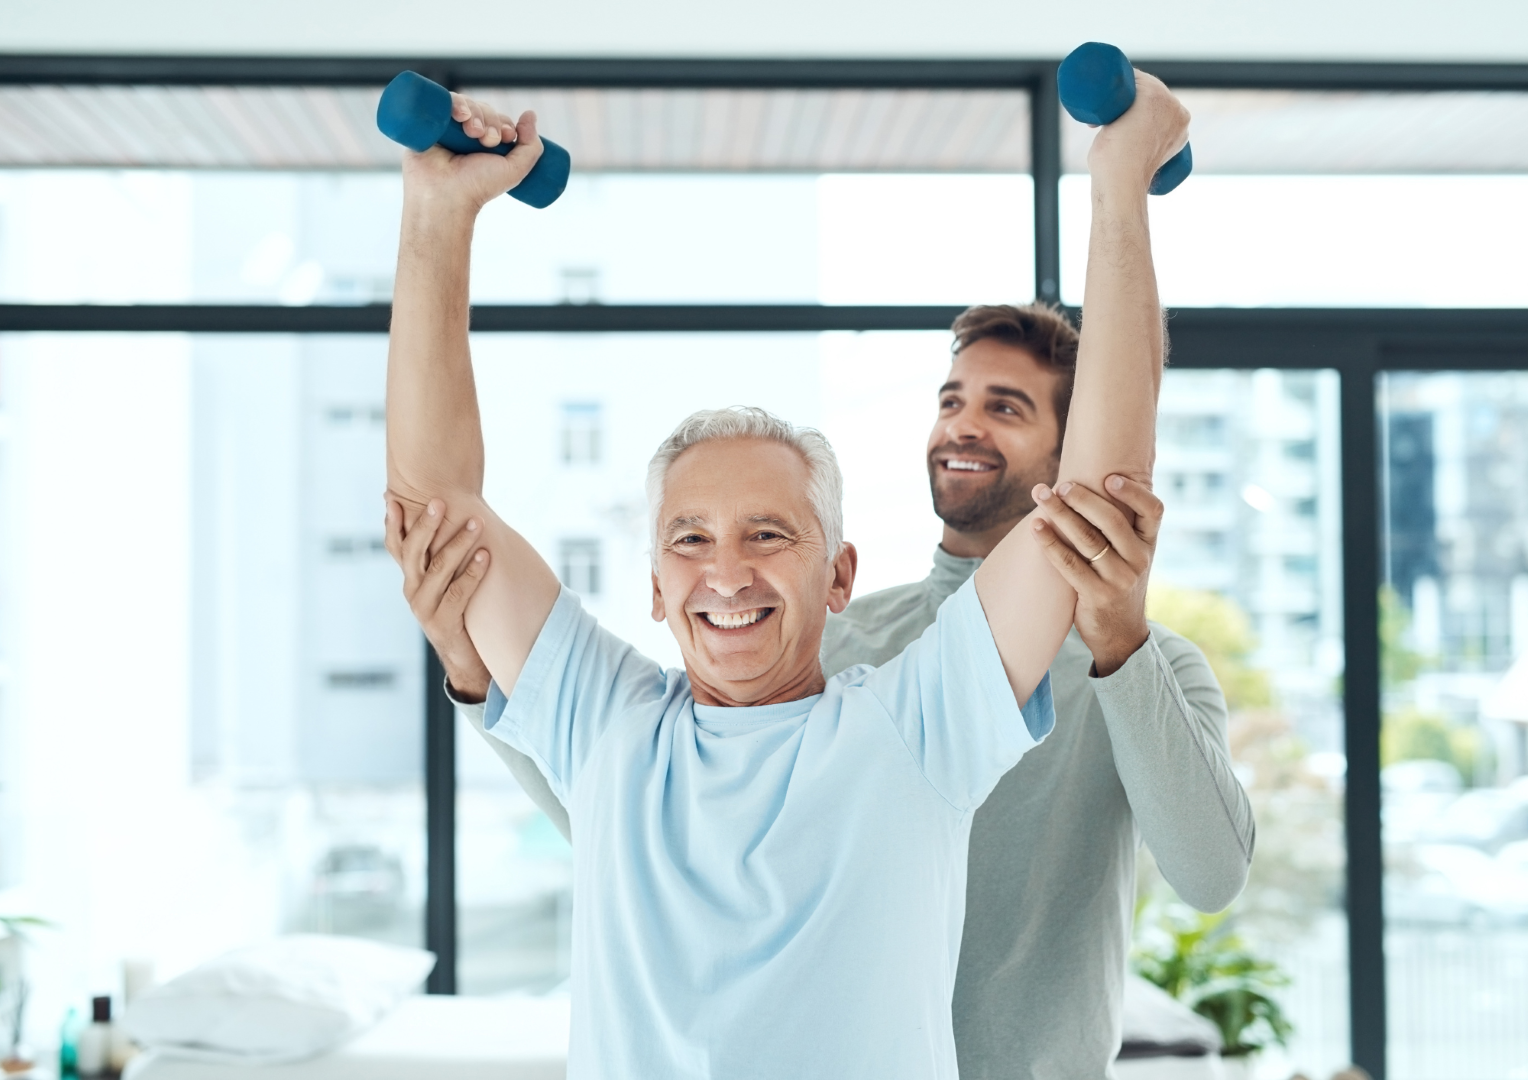 physiotherapist assists an elderly man to hold hand weights above his head.